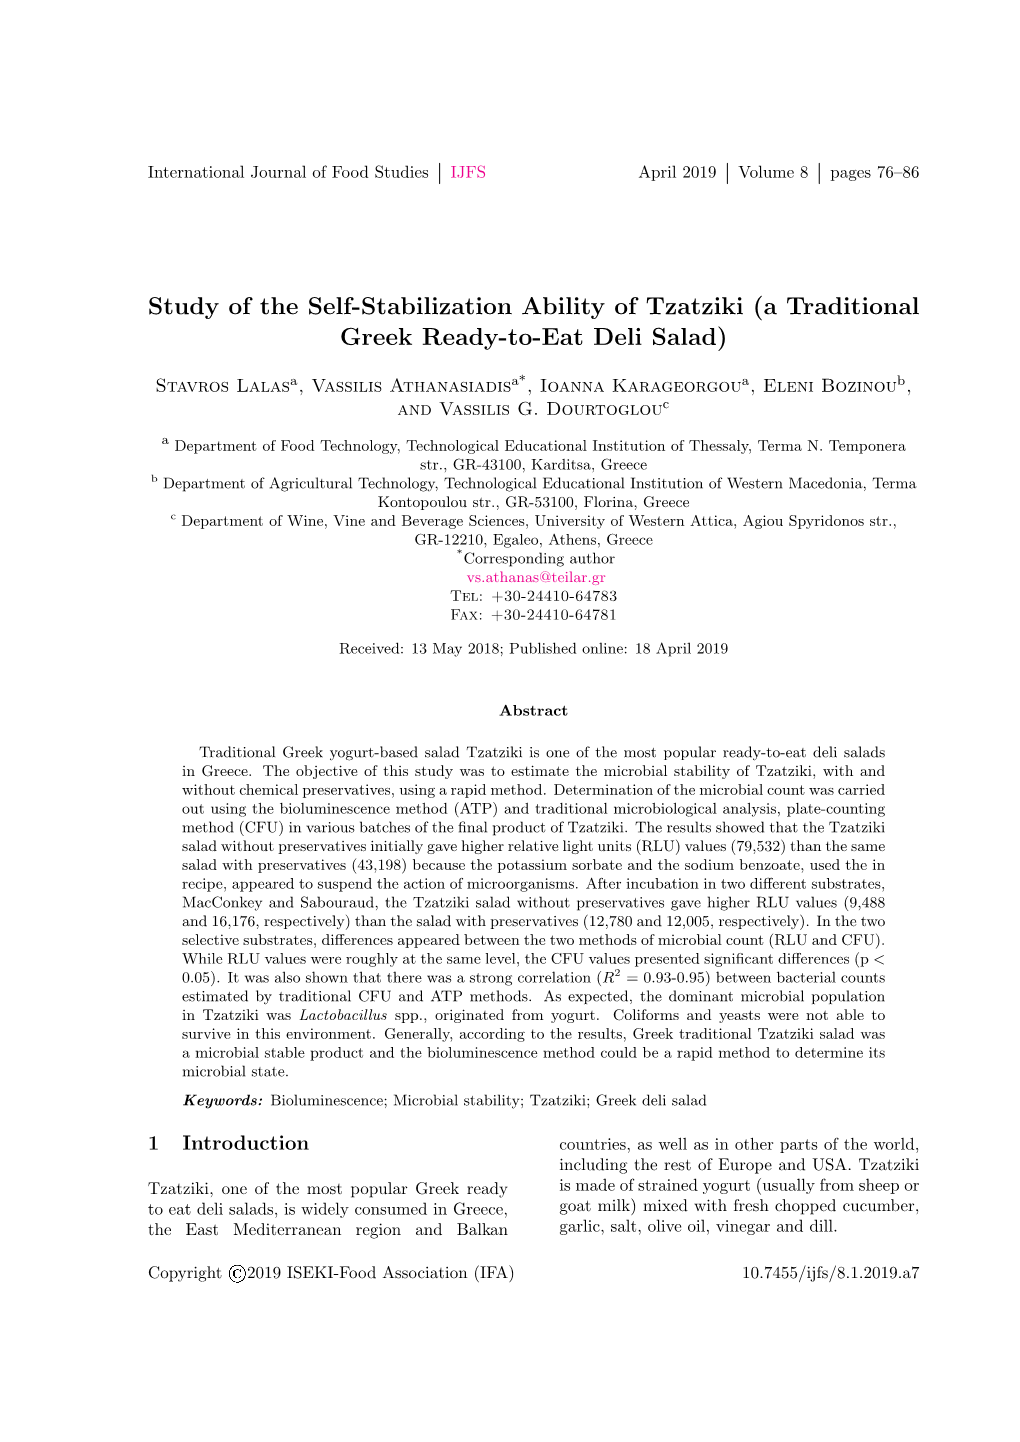 Study of the Self-Stabilization Ability of Tzatziki (A Traditional Greek Ready-To-Eat Deli Salad)